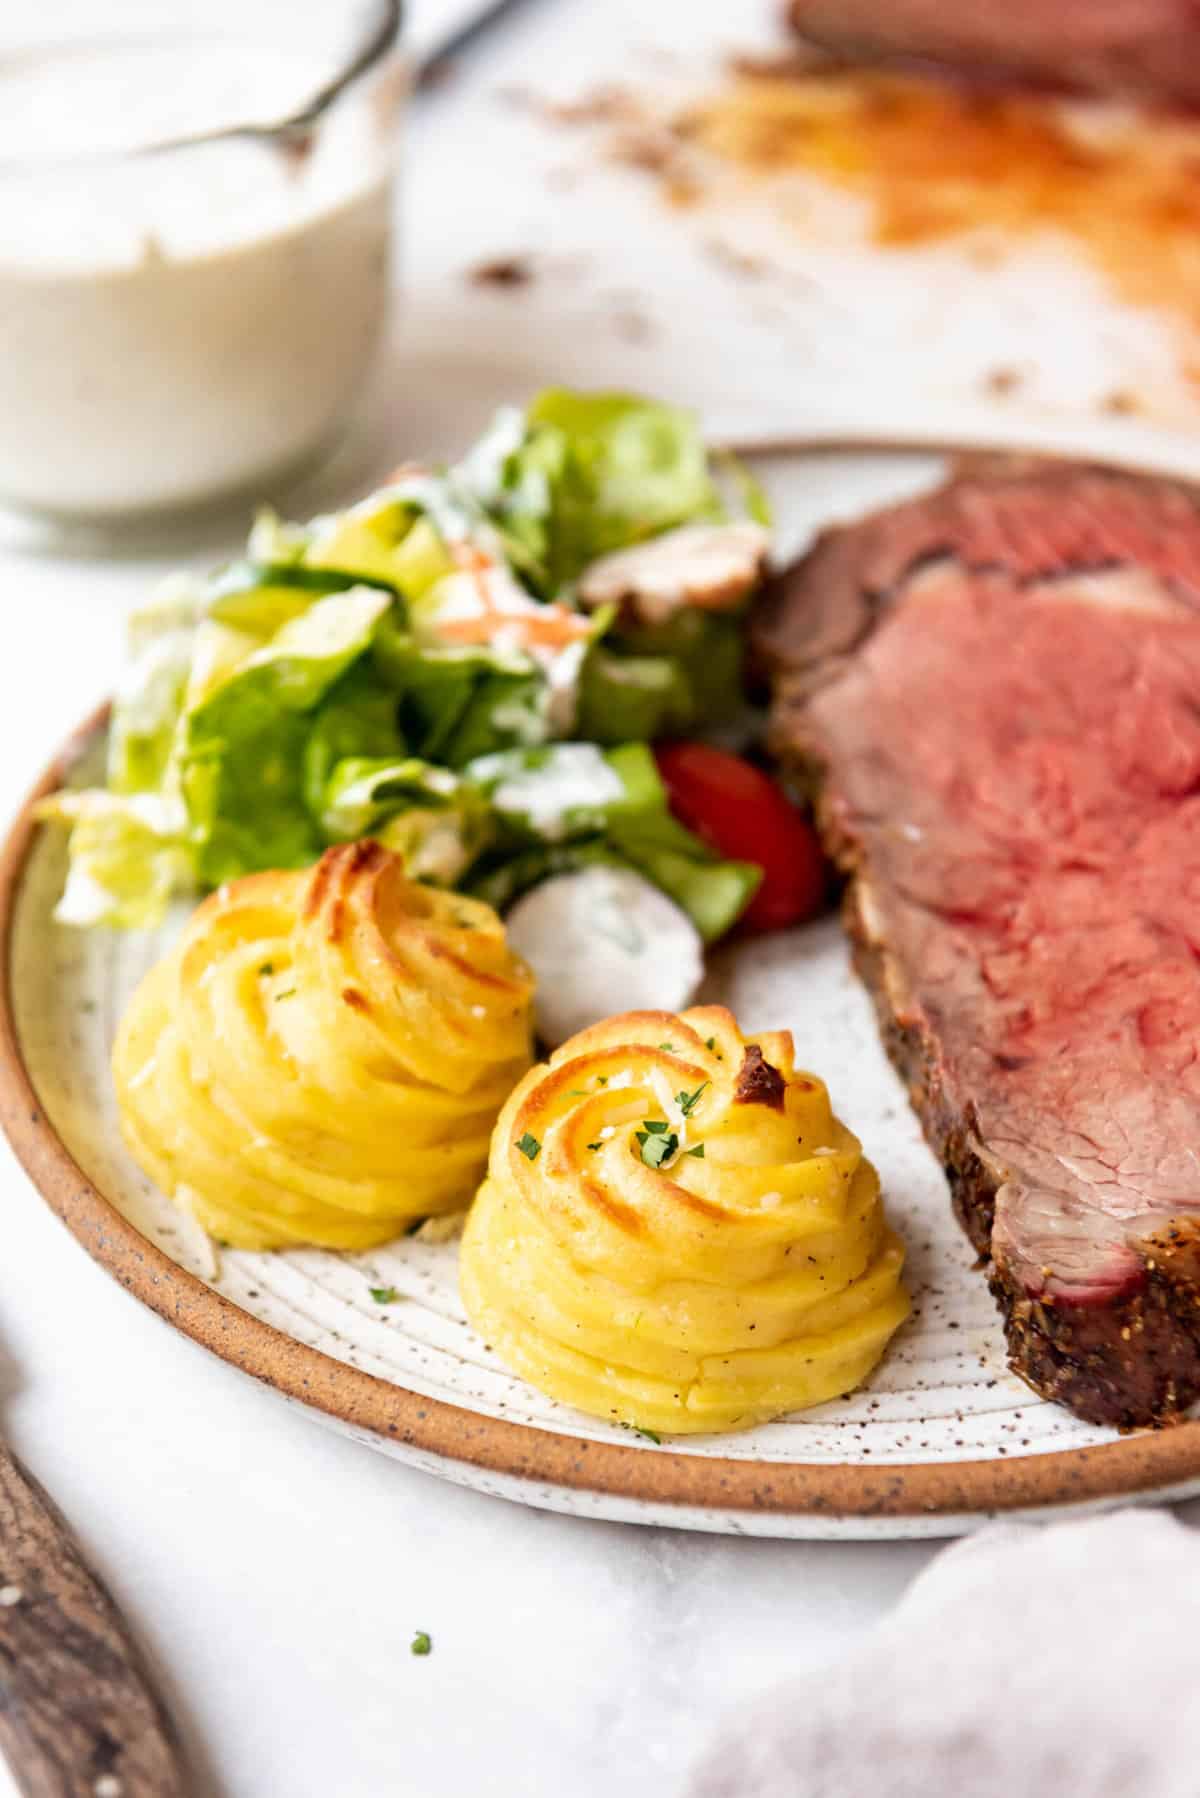 A plate of prime rib, garden salad, and duchess potatoes.